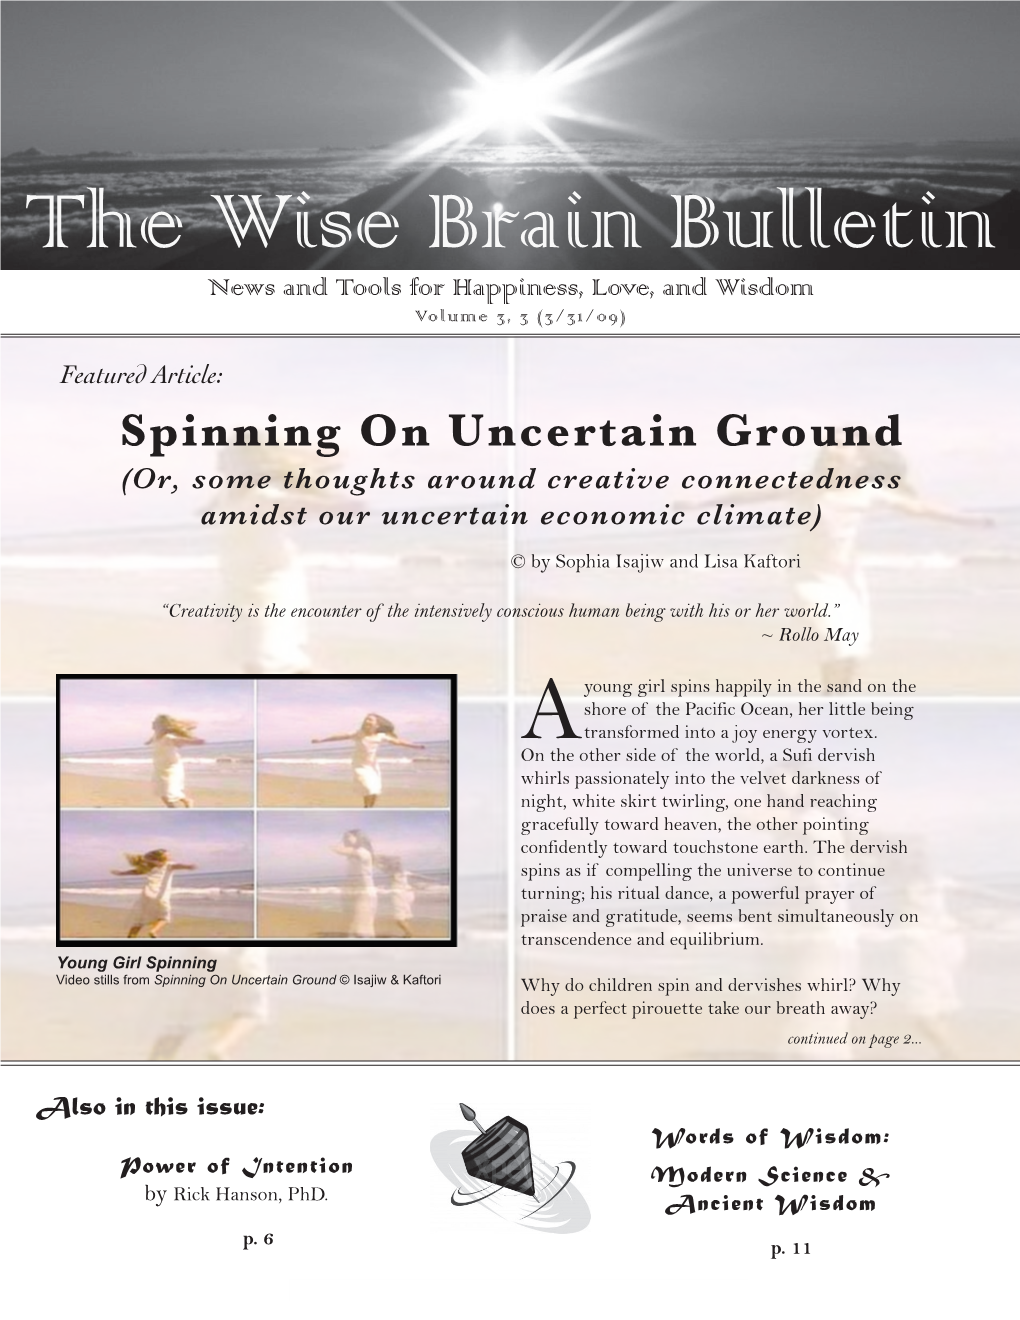 The Wise Brain Bulletin News and Tools for Happiness, Love, and Wisdom Volume 3, 3 (3/31/09)